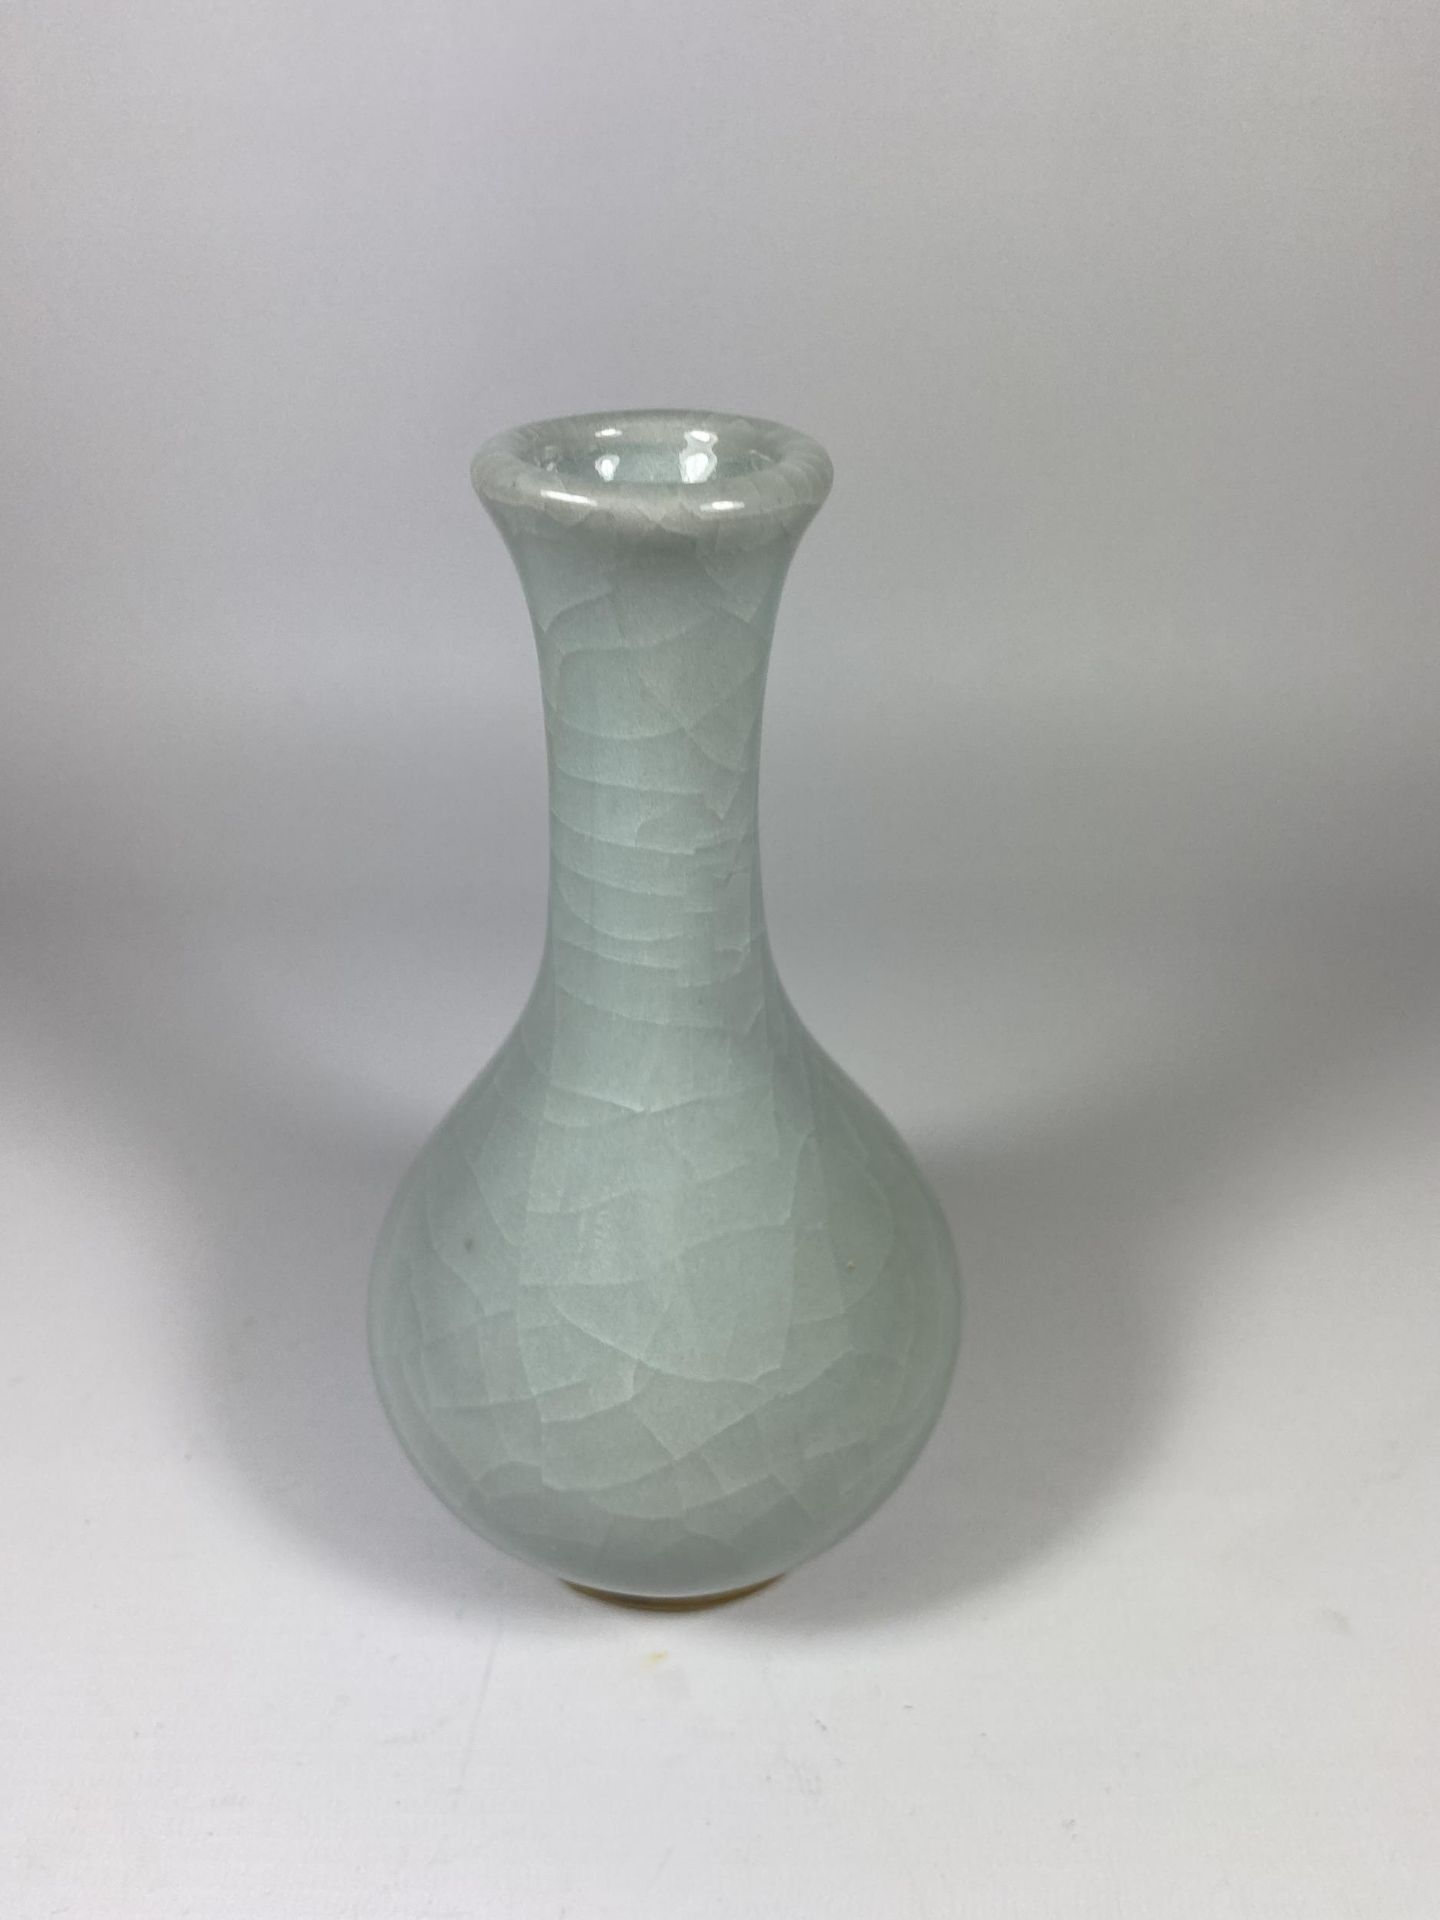 A CHINESE CELADON GROUND PORCELAIN BOTTLE VASE ON CARVED WOODEN STAND, HEIGHT OF VASE 18CM - Image 2 of 6